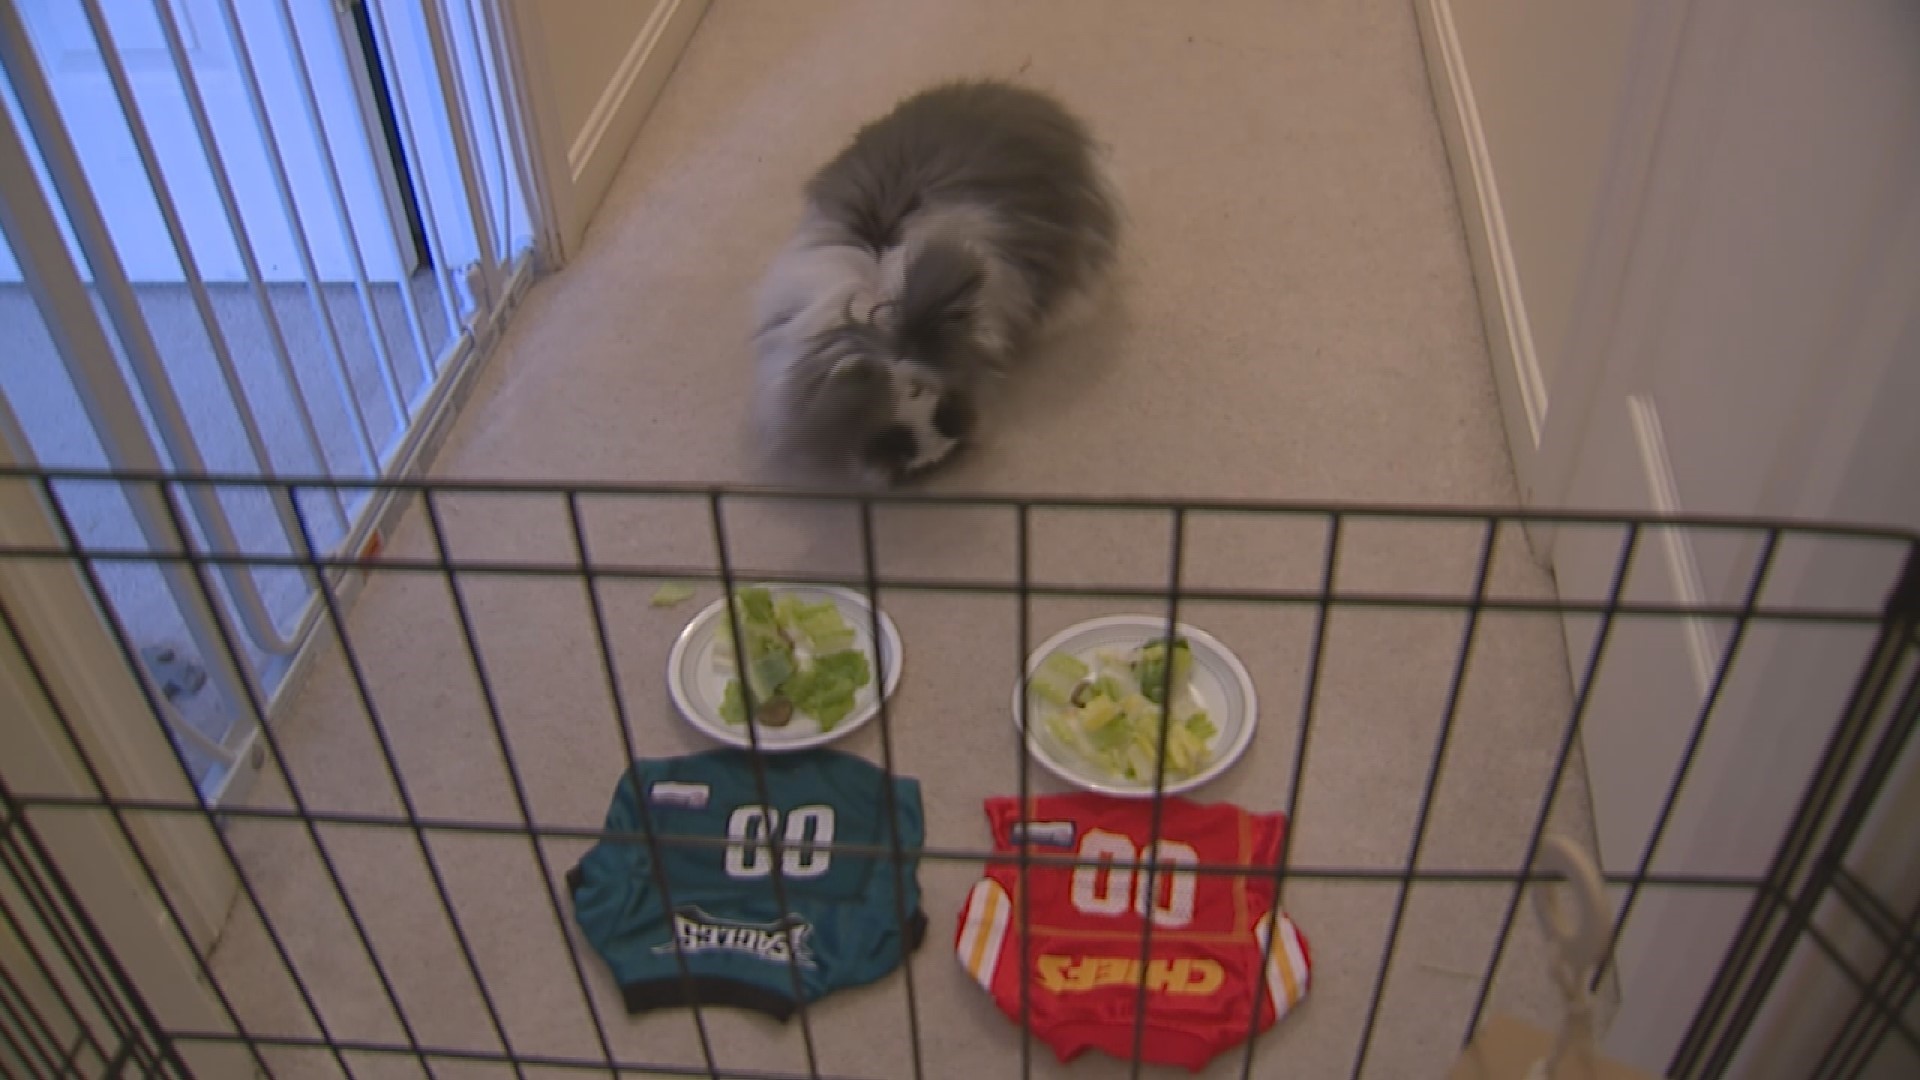 Andrea Michaels' bunny brigade make their pick for the Super Bowl LVII Champion! See who Oreo Doppler, Apollo Thunder, Stormy Cocoa Puffs and Maple Sky choose.